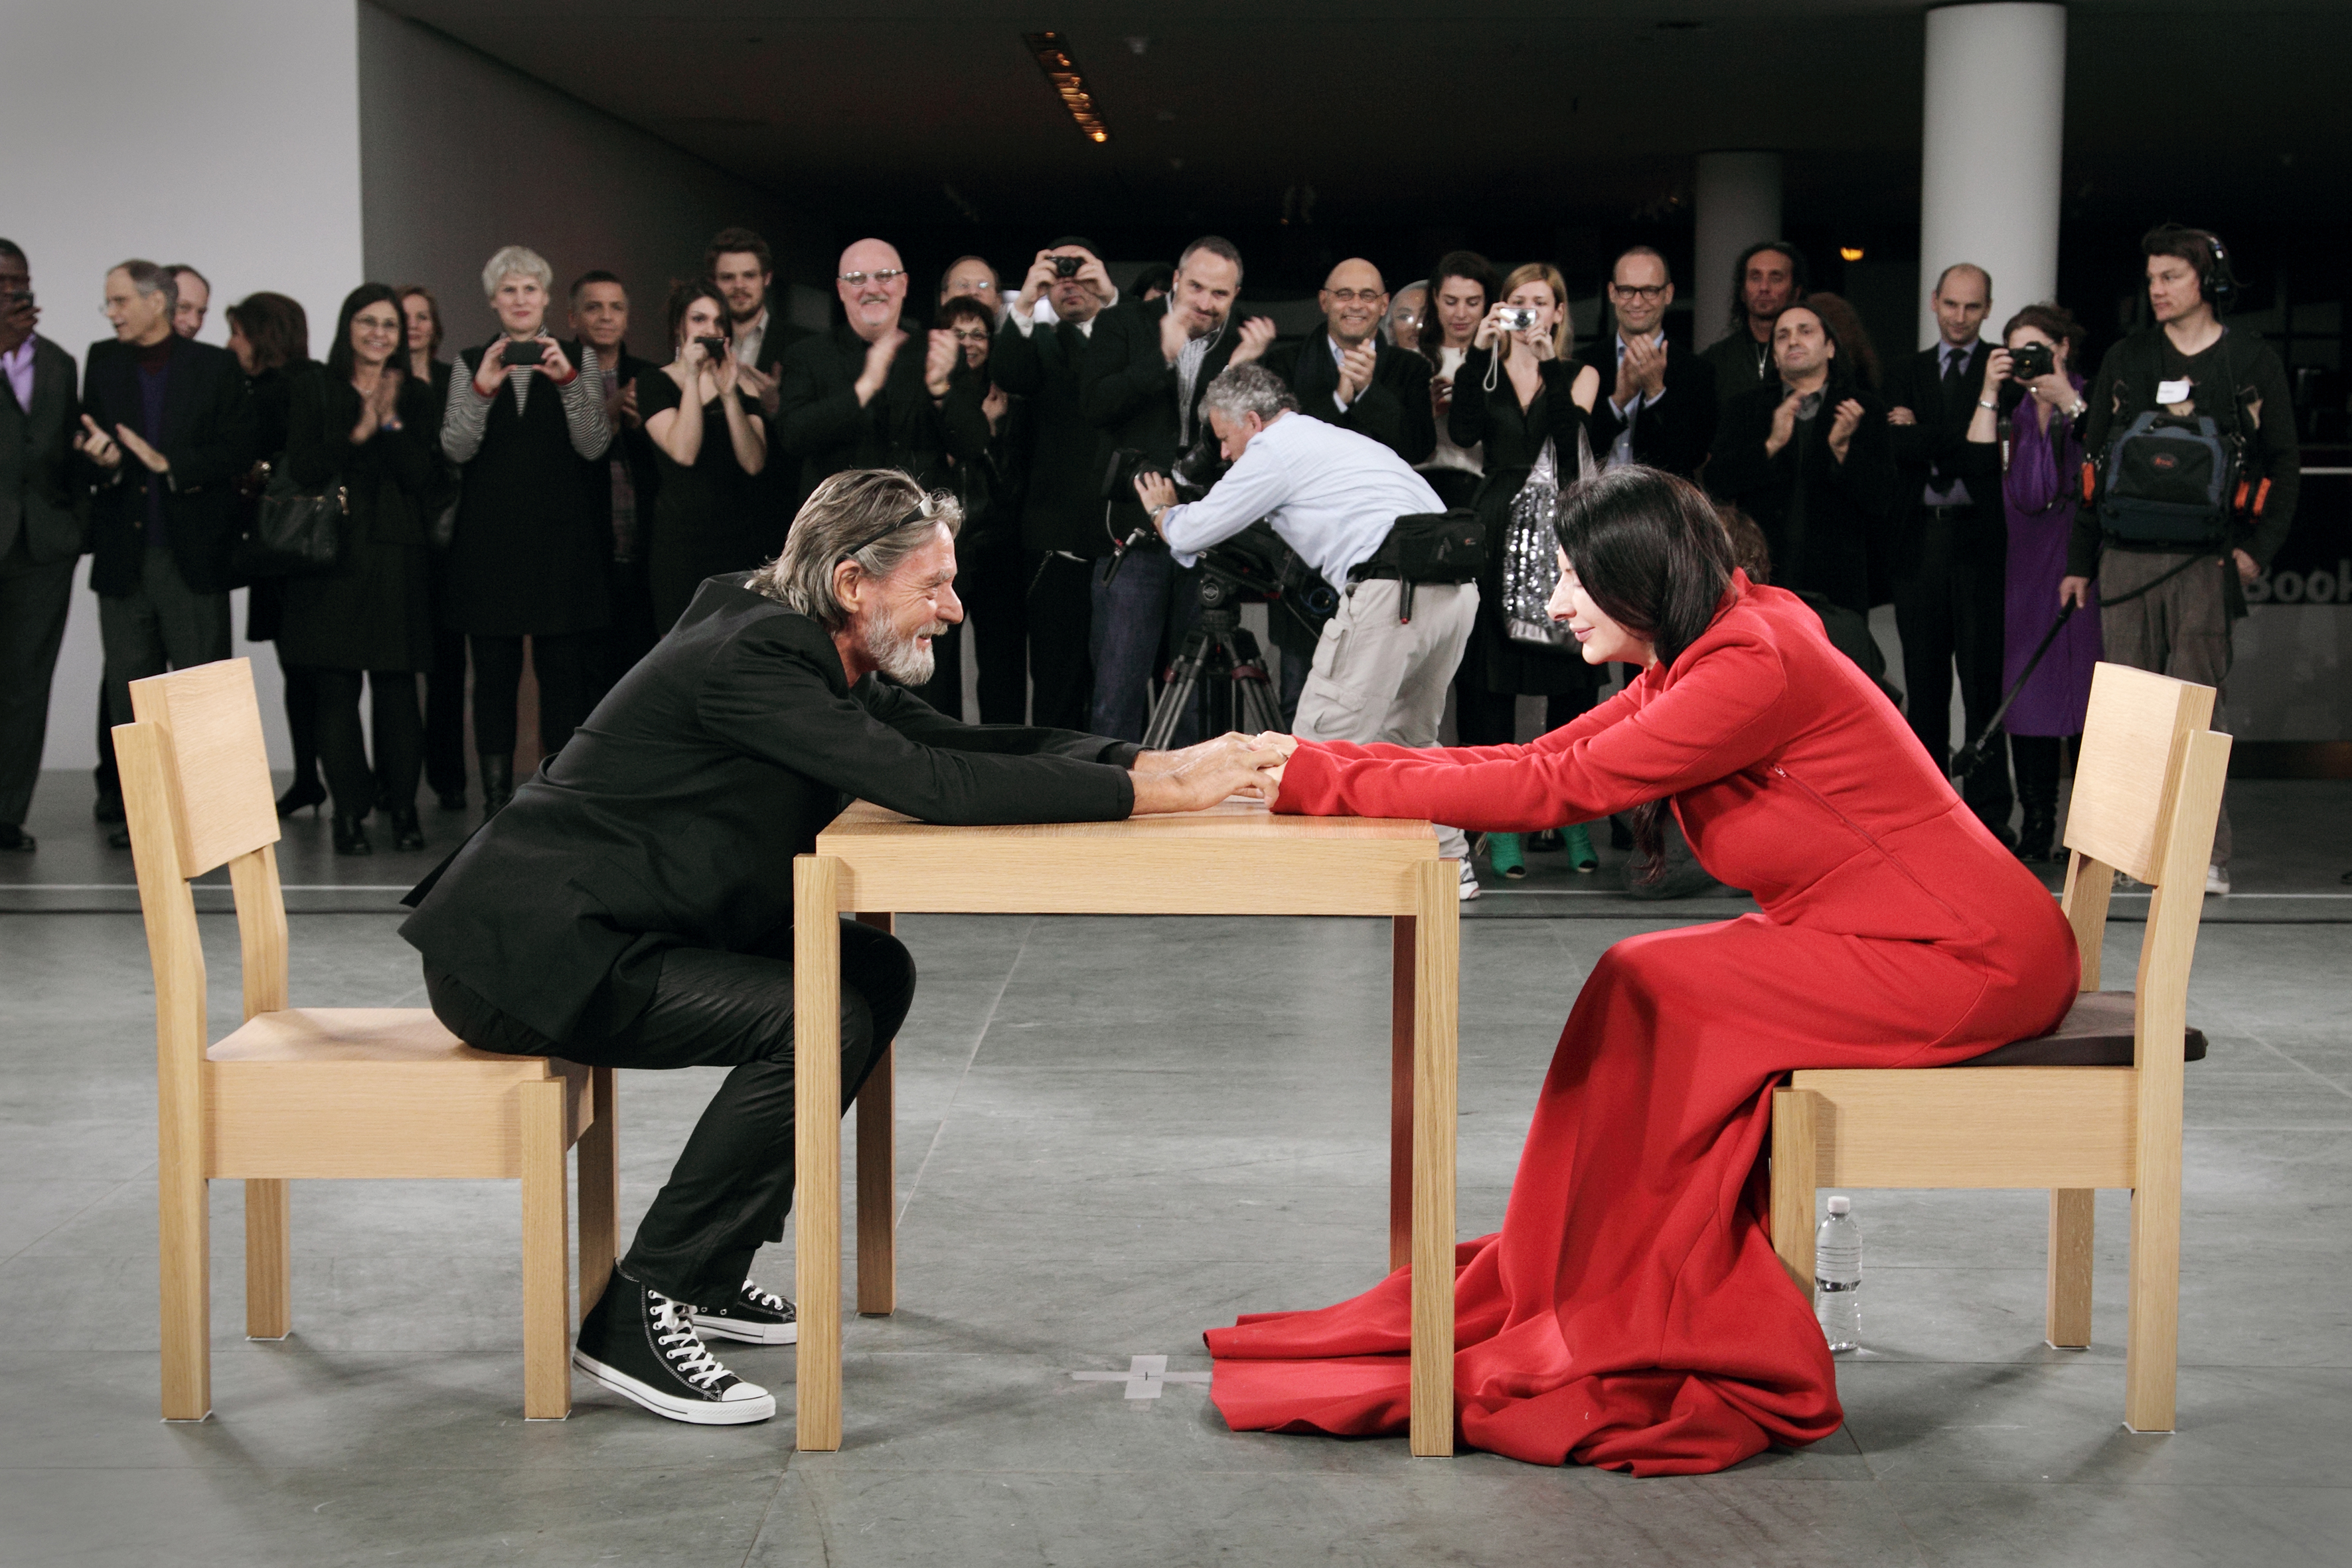 Marina Abramović The Artist is Present 2010, 7- channel video installation (color, no sound), New York, Abramović LLC. Courtesy of Marina Abramović Archives and Sean Kelly, New York, MAC/2017/071Credit: Photography by Marco Anelli. Courtesy of Marina Abramović Archives Marina Abramović by SIAE 2018